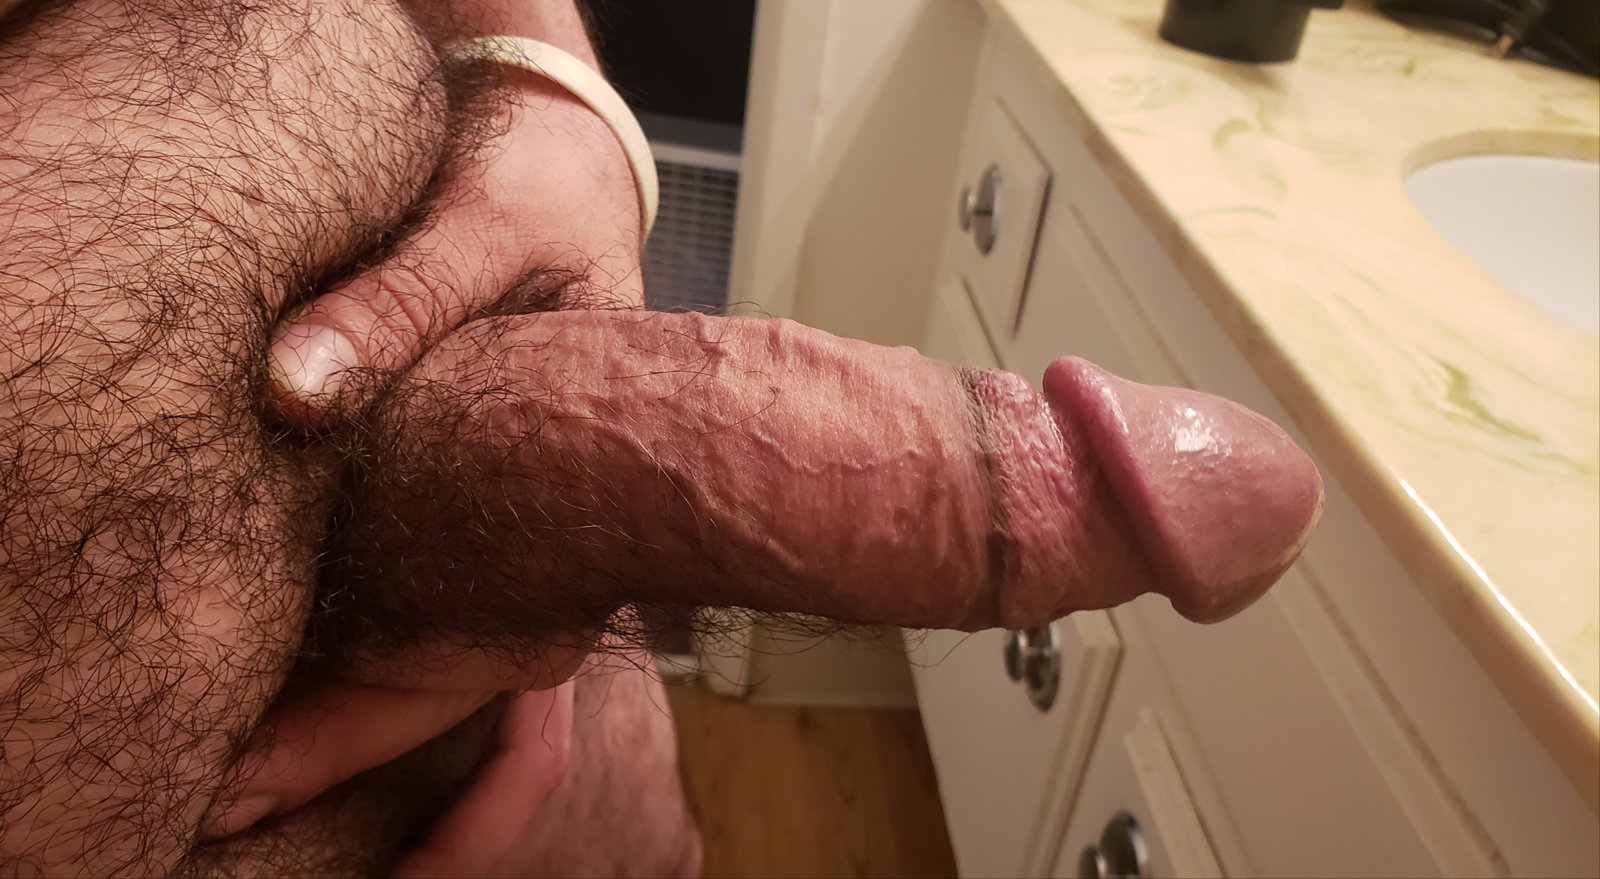 Photo by Rasz67 with the username @Rasz67,  May 21, 2020 at 4:58 AM. The post is about the topic Rate my pussy or dick and the text says 'rate me 
#big #veiny #thick #hung #fatcock'